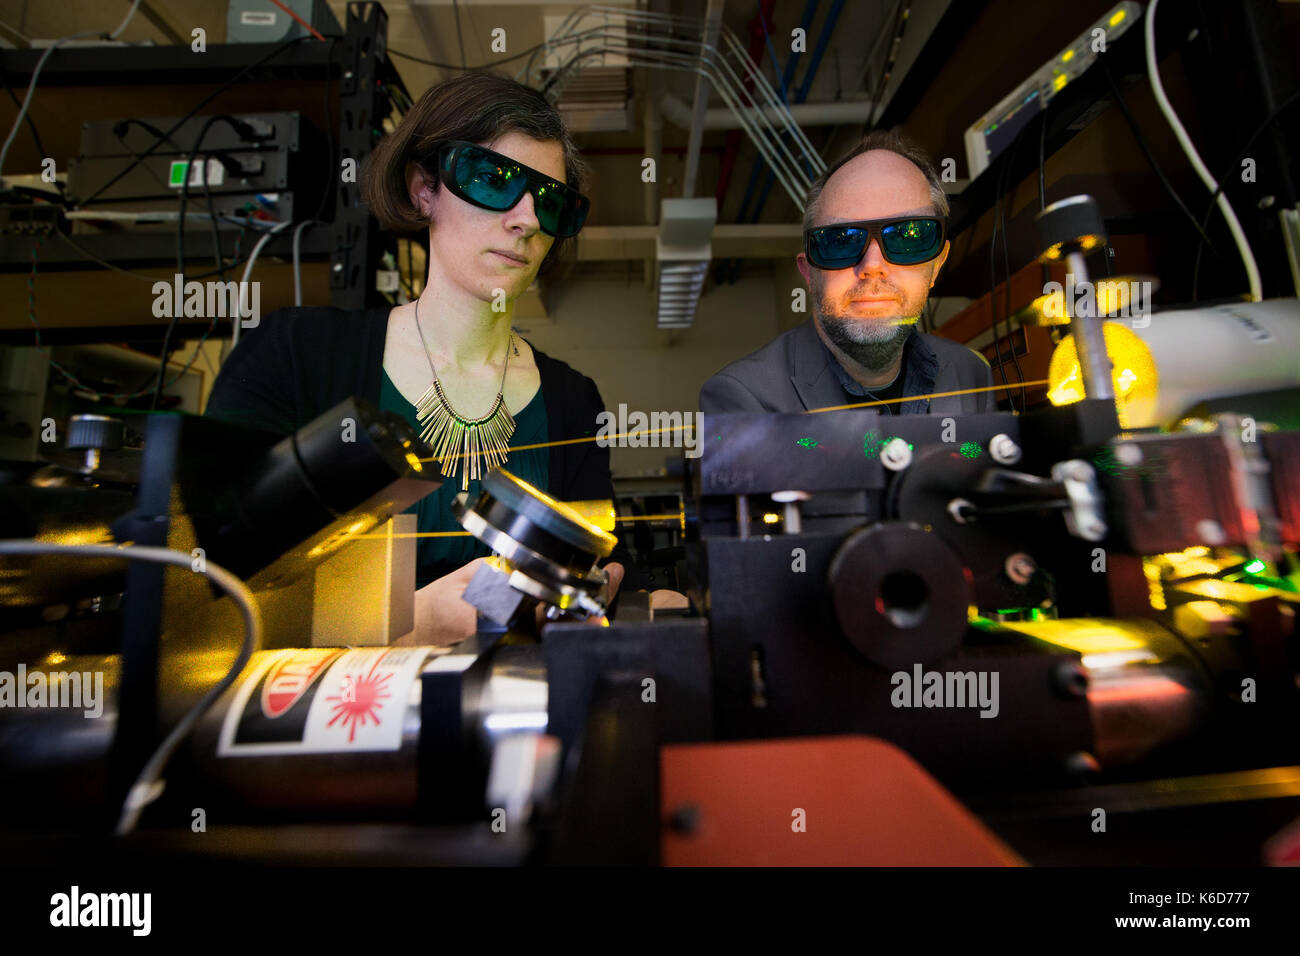 Canberra, Canberra. 6th Sep, 2017. Doctor Rose Ahlefeldt (L) and Associate Professor Matthew Sellars operate a high resolution dye laser, which they use to study rare earth crystals in the Australian National University (ANU), Canberra, on Sept. 6, 2017. Australian scientists have made a significant breakthrough in developing an 'unhackable' quantum internet, it was announced on Sept. 12. Credit: ANU/Stuart Hay/Xinhua/Alamy Live News Stock Photo